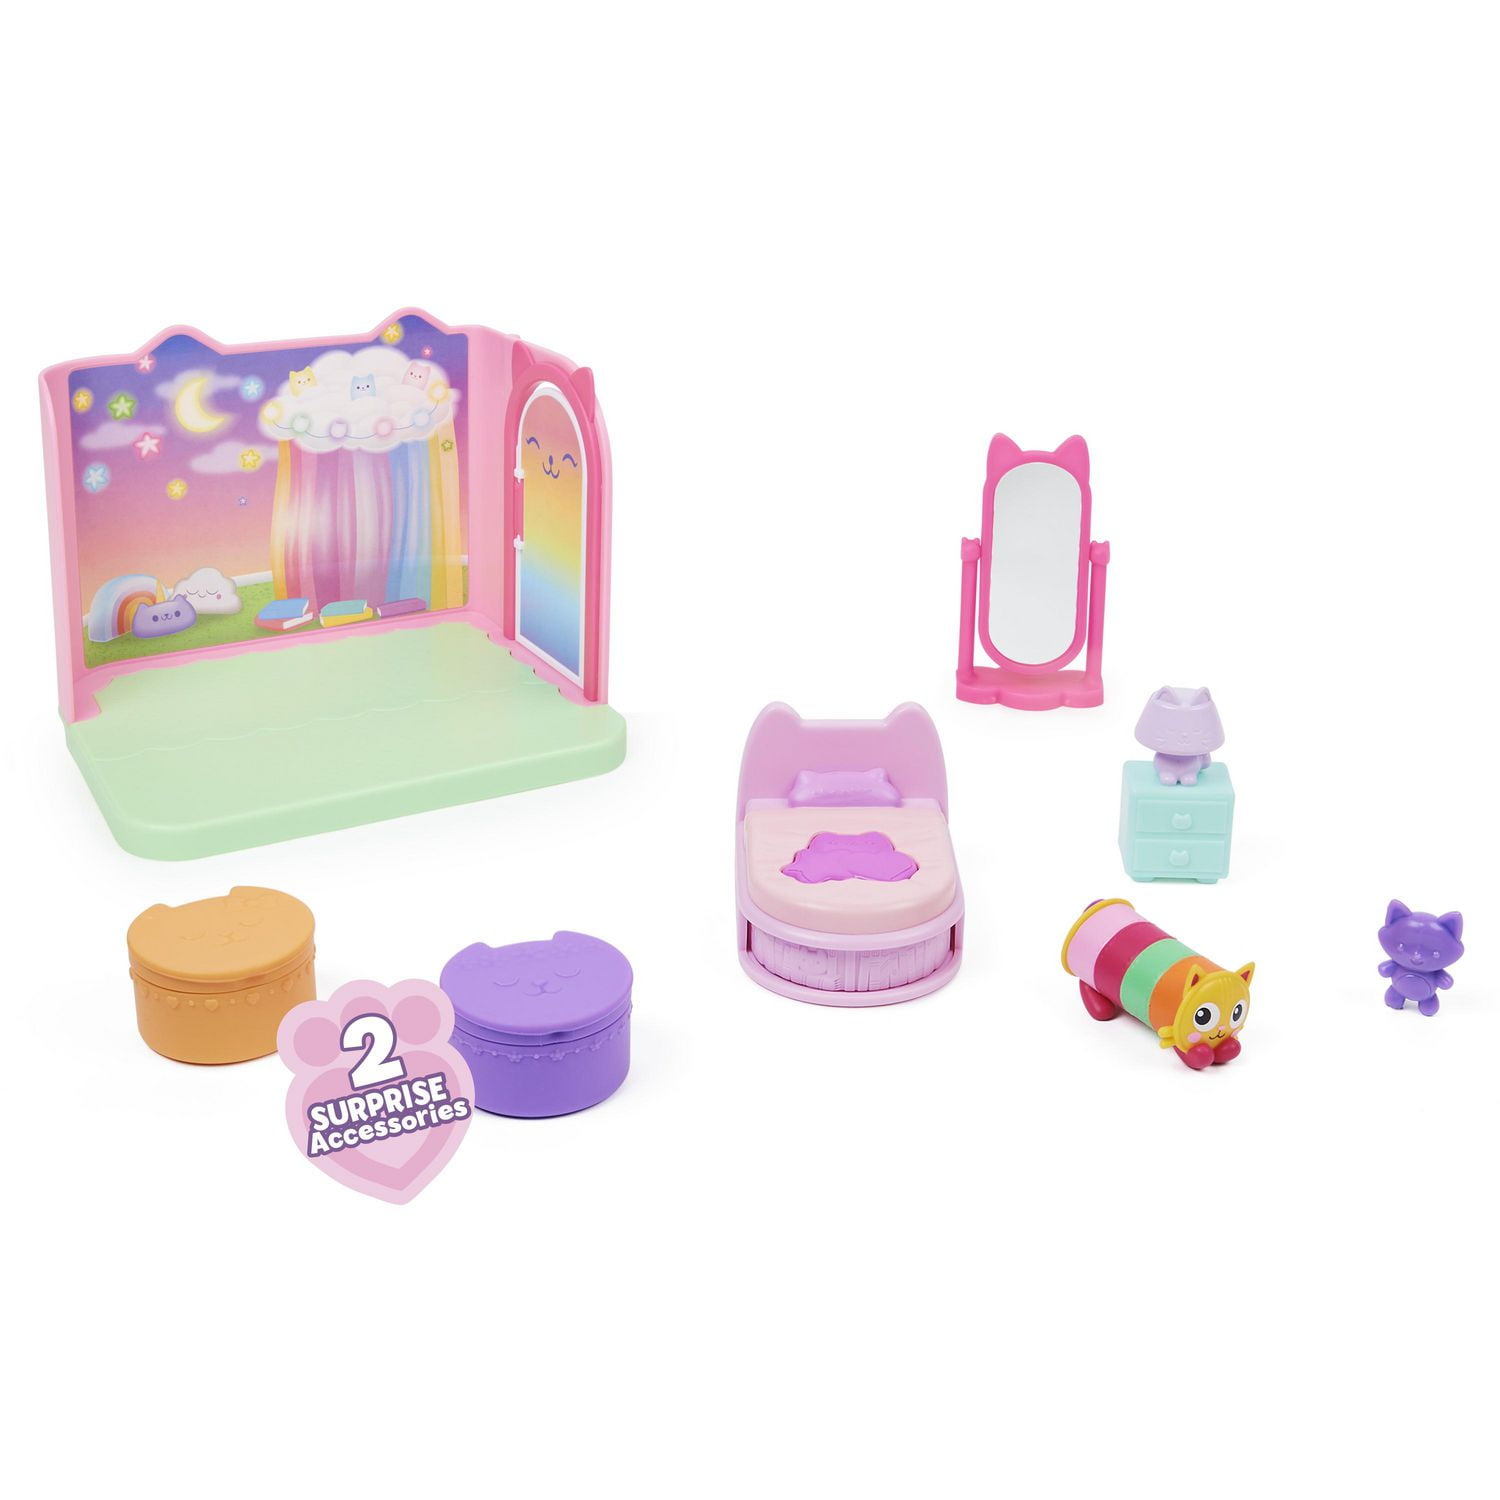 Gabby's Dollhouse, Cakey Kitchen Set for Kids with Play Kitchen  Accessories, Play Food, Sounds, Music and Kids Toys for Girls and Boys Ages  3 and up 